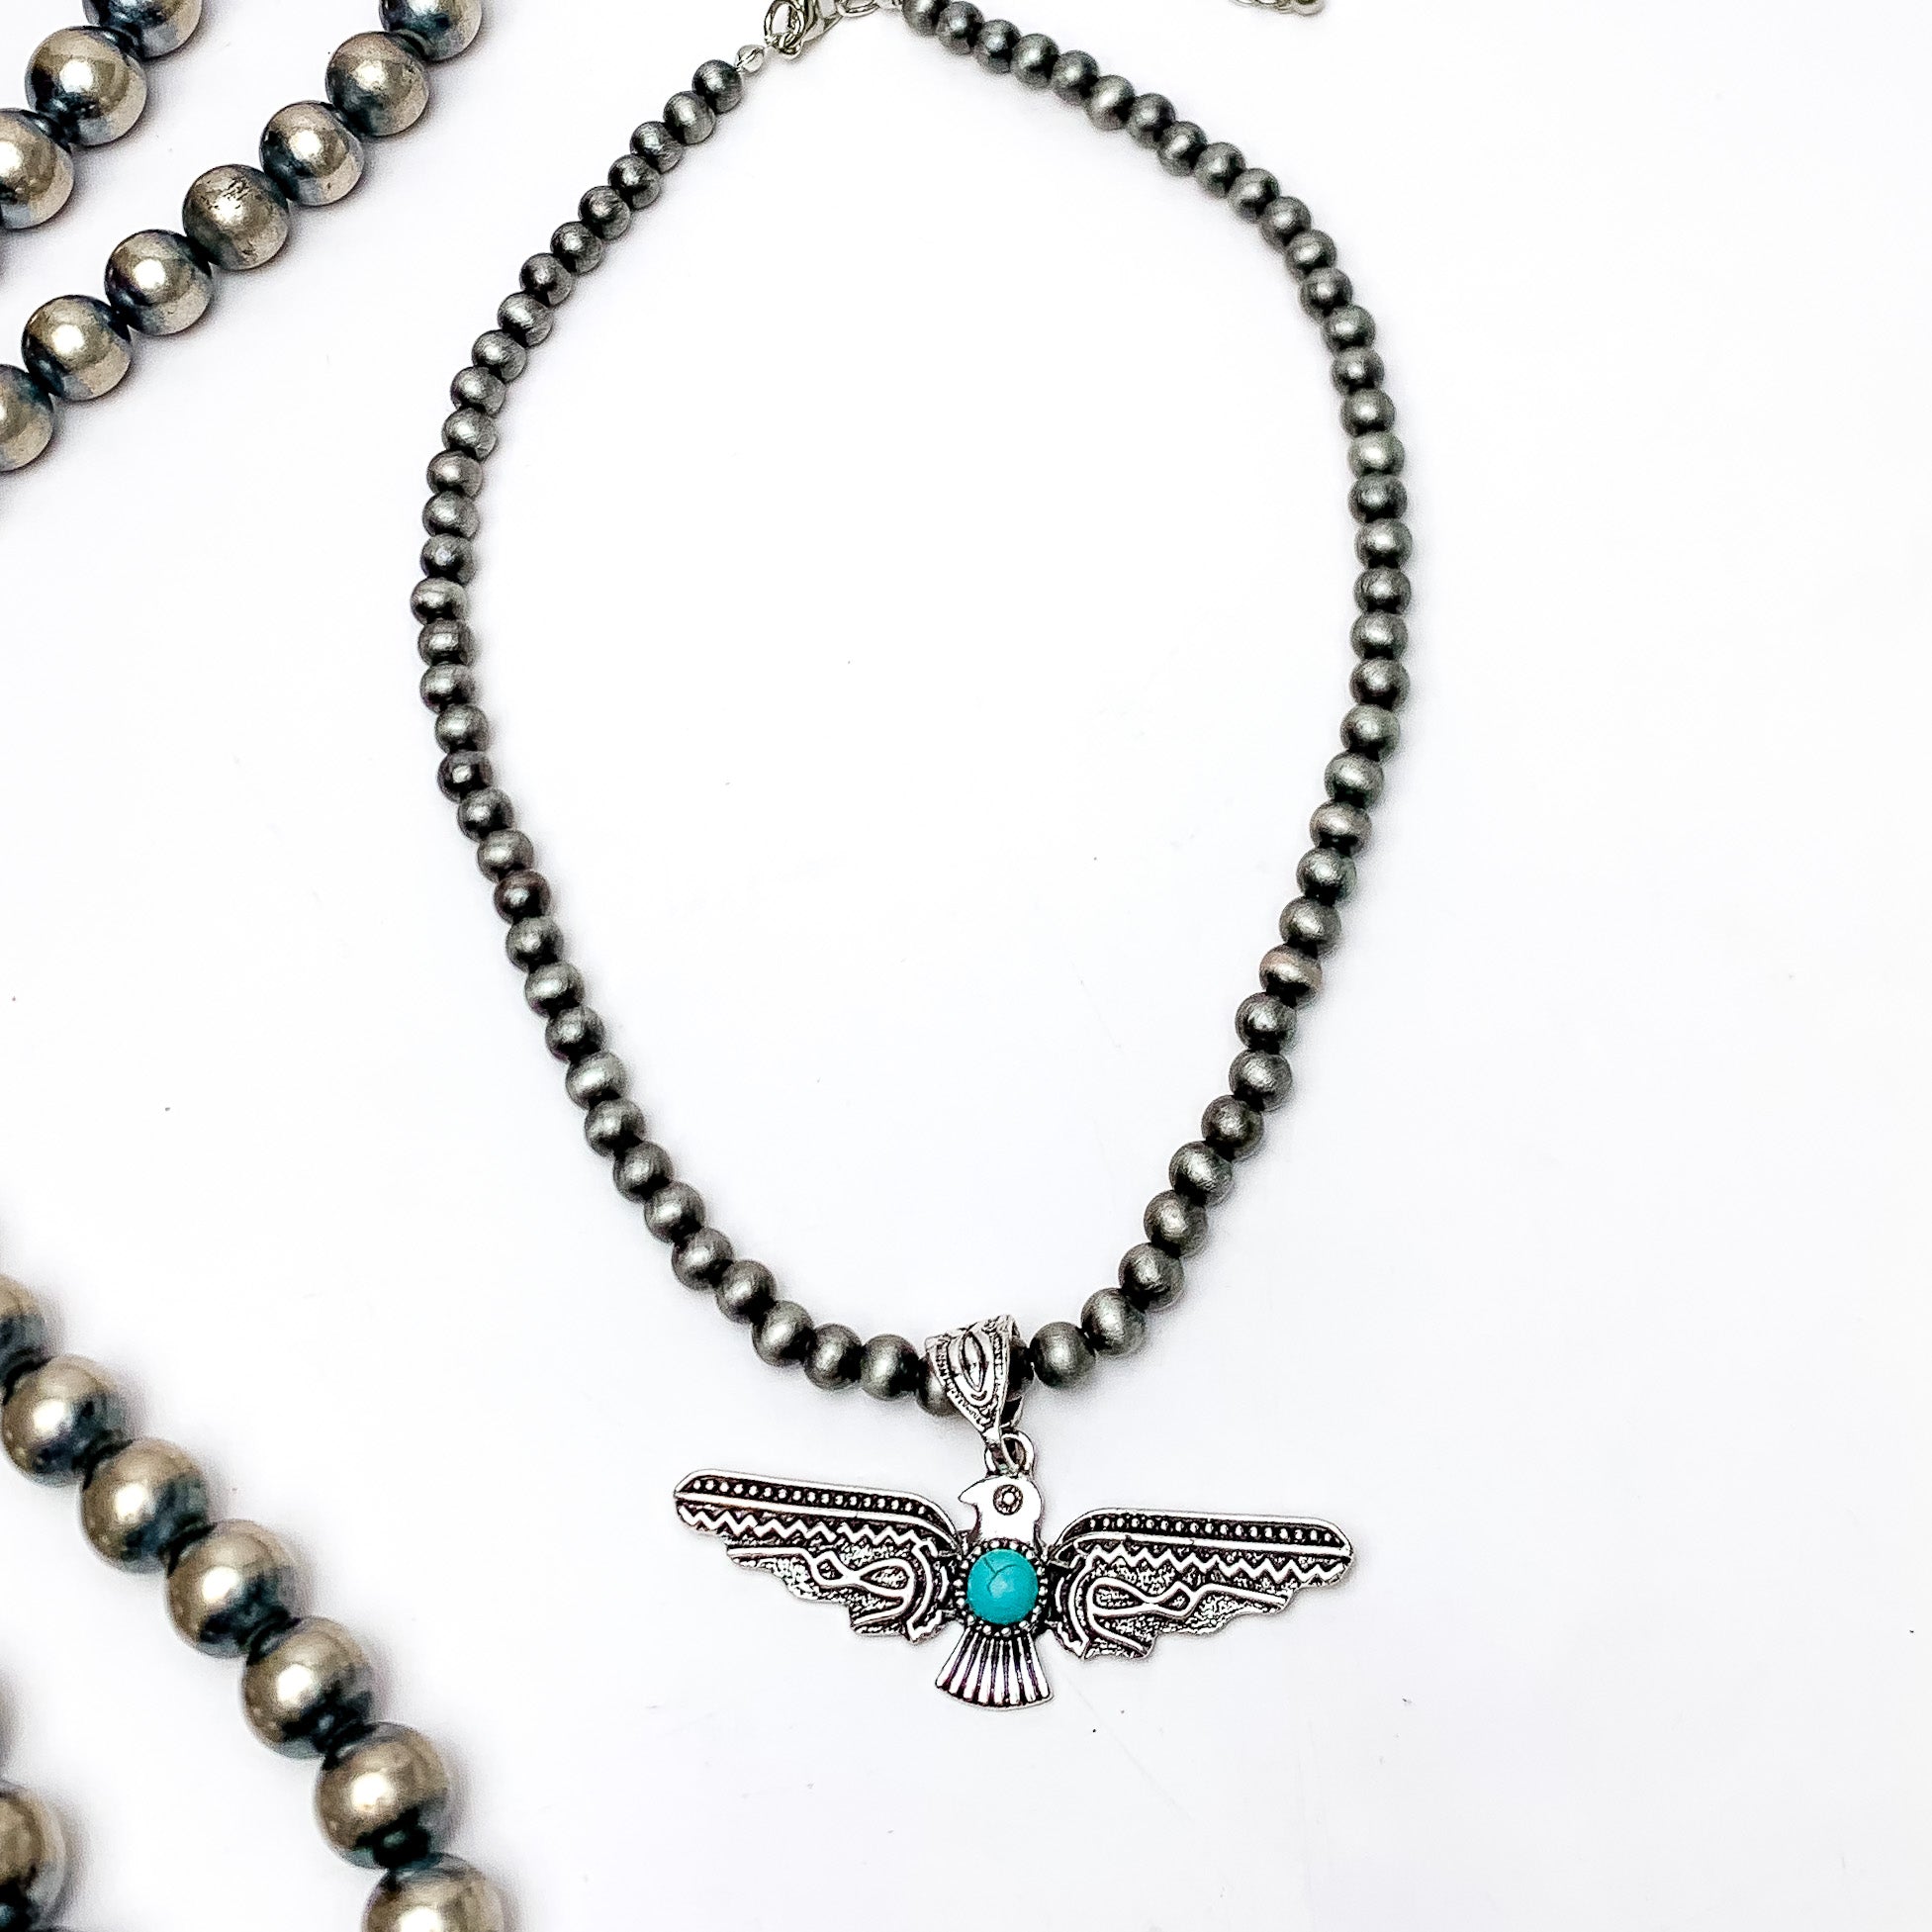 Thunder Bird Pendent Silver Tone Beaded Necklace. This silver beaded necklace with a turquoise stone is pictured on a white background with Navajo beads on the left side.